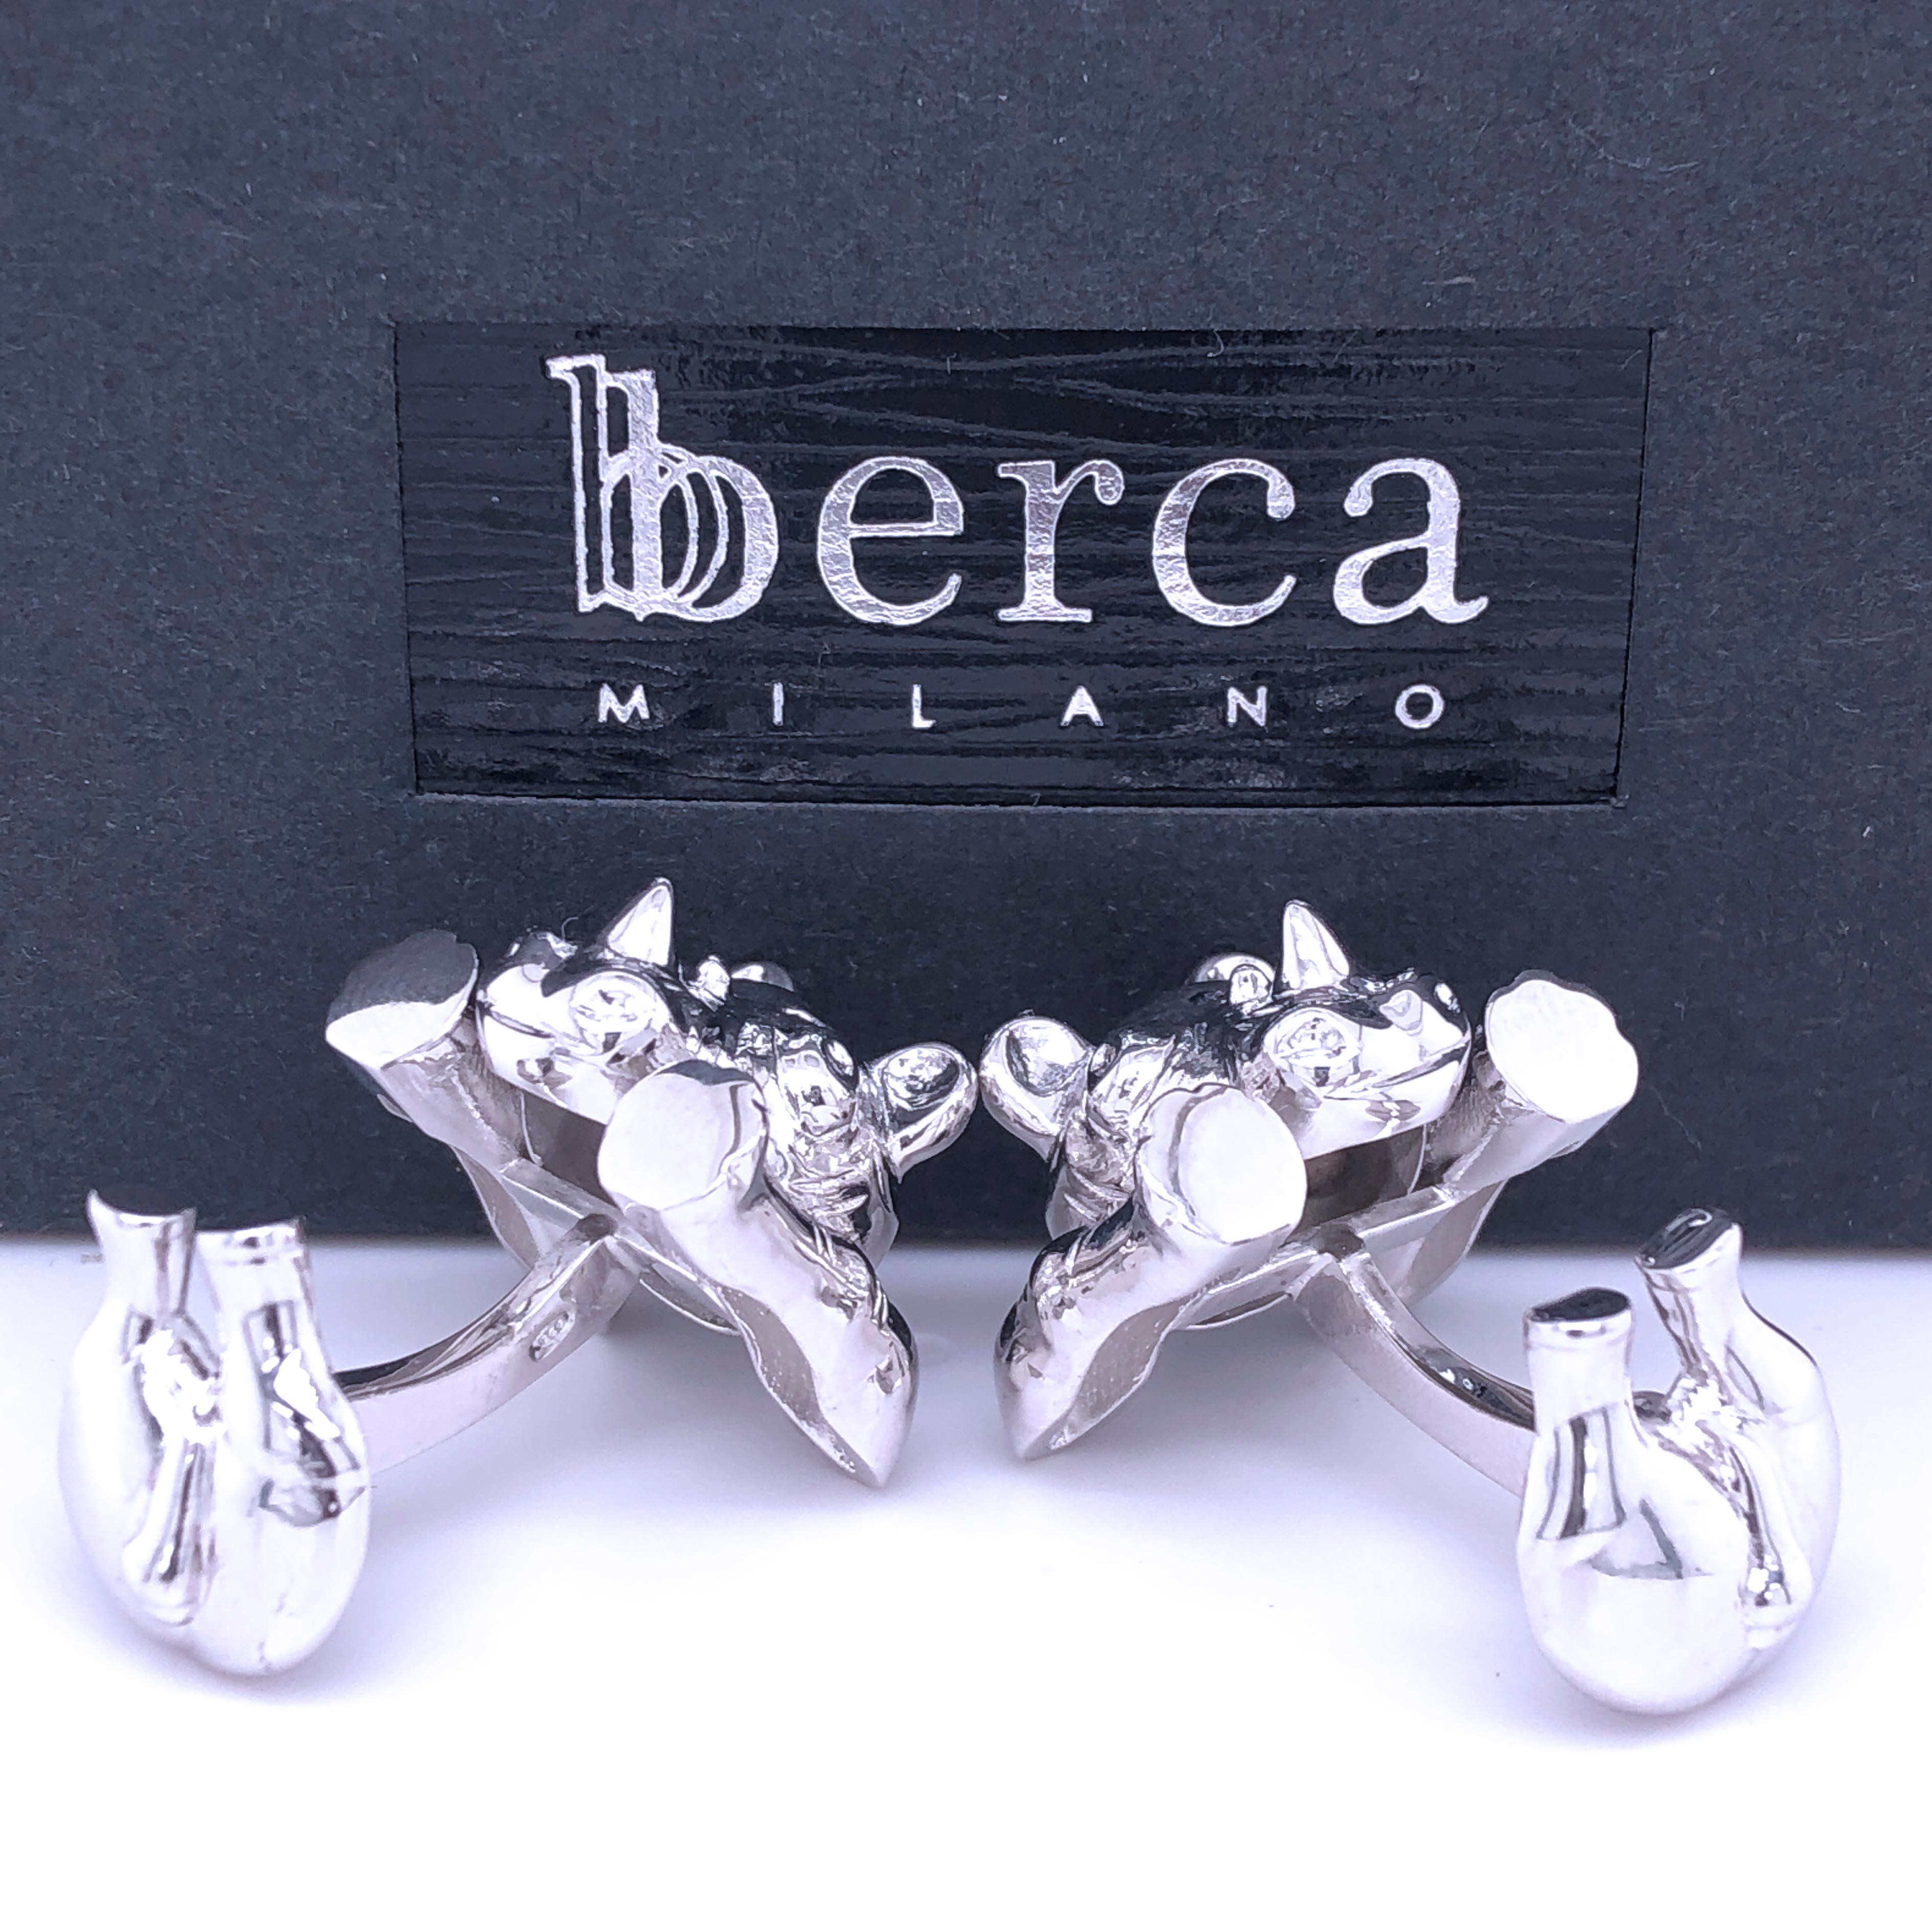 Berca Hand Engraved Rhinoceros Shaped Solid Sterling Silver Cufflinks For Sale 2